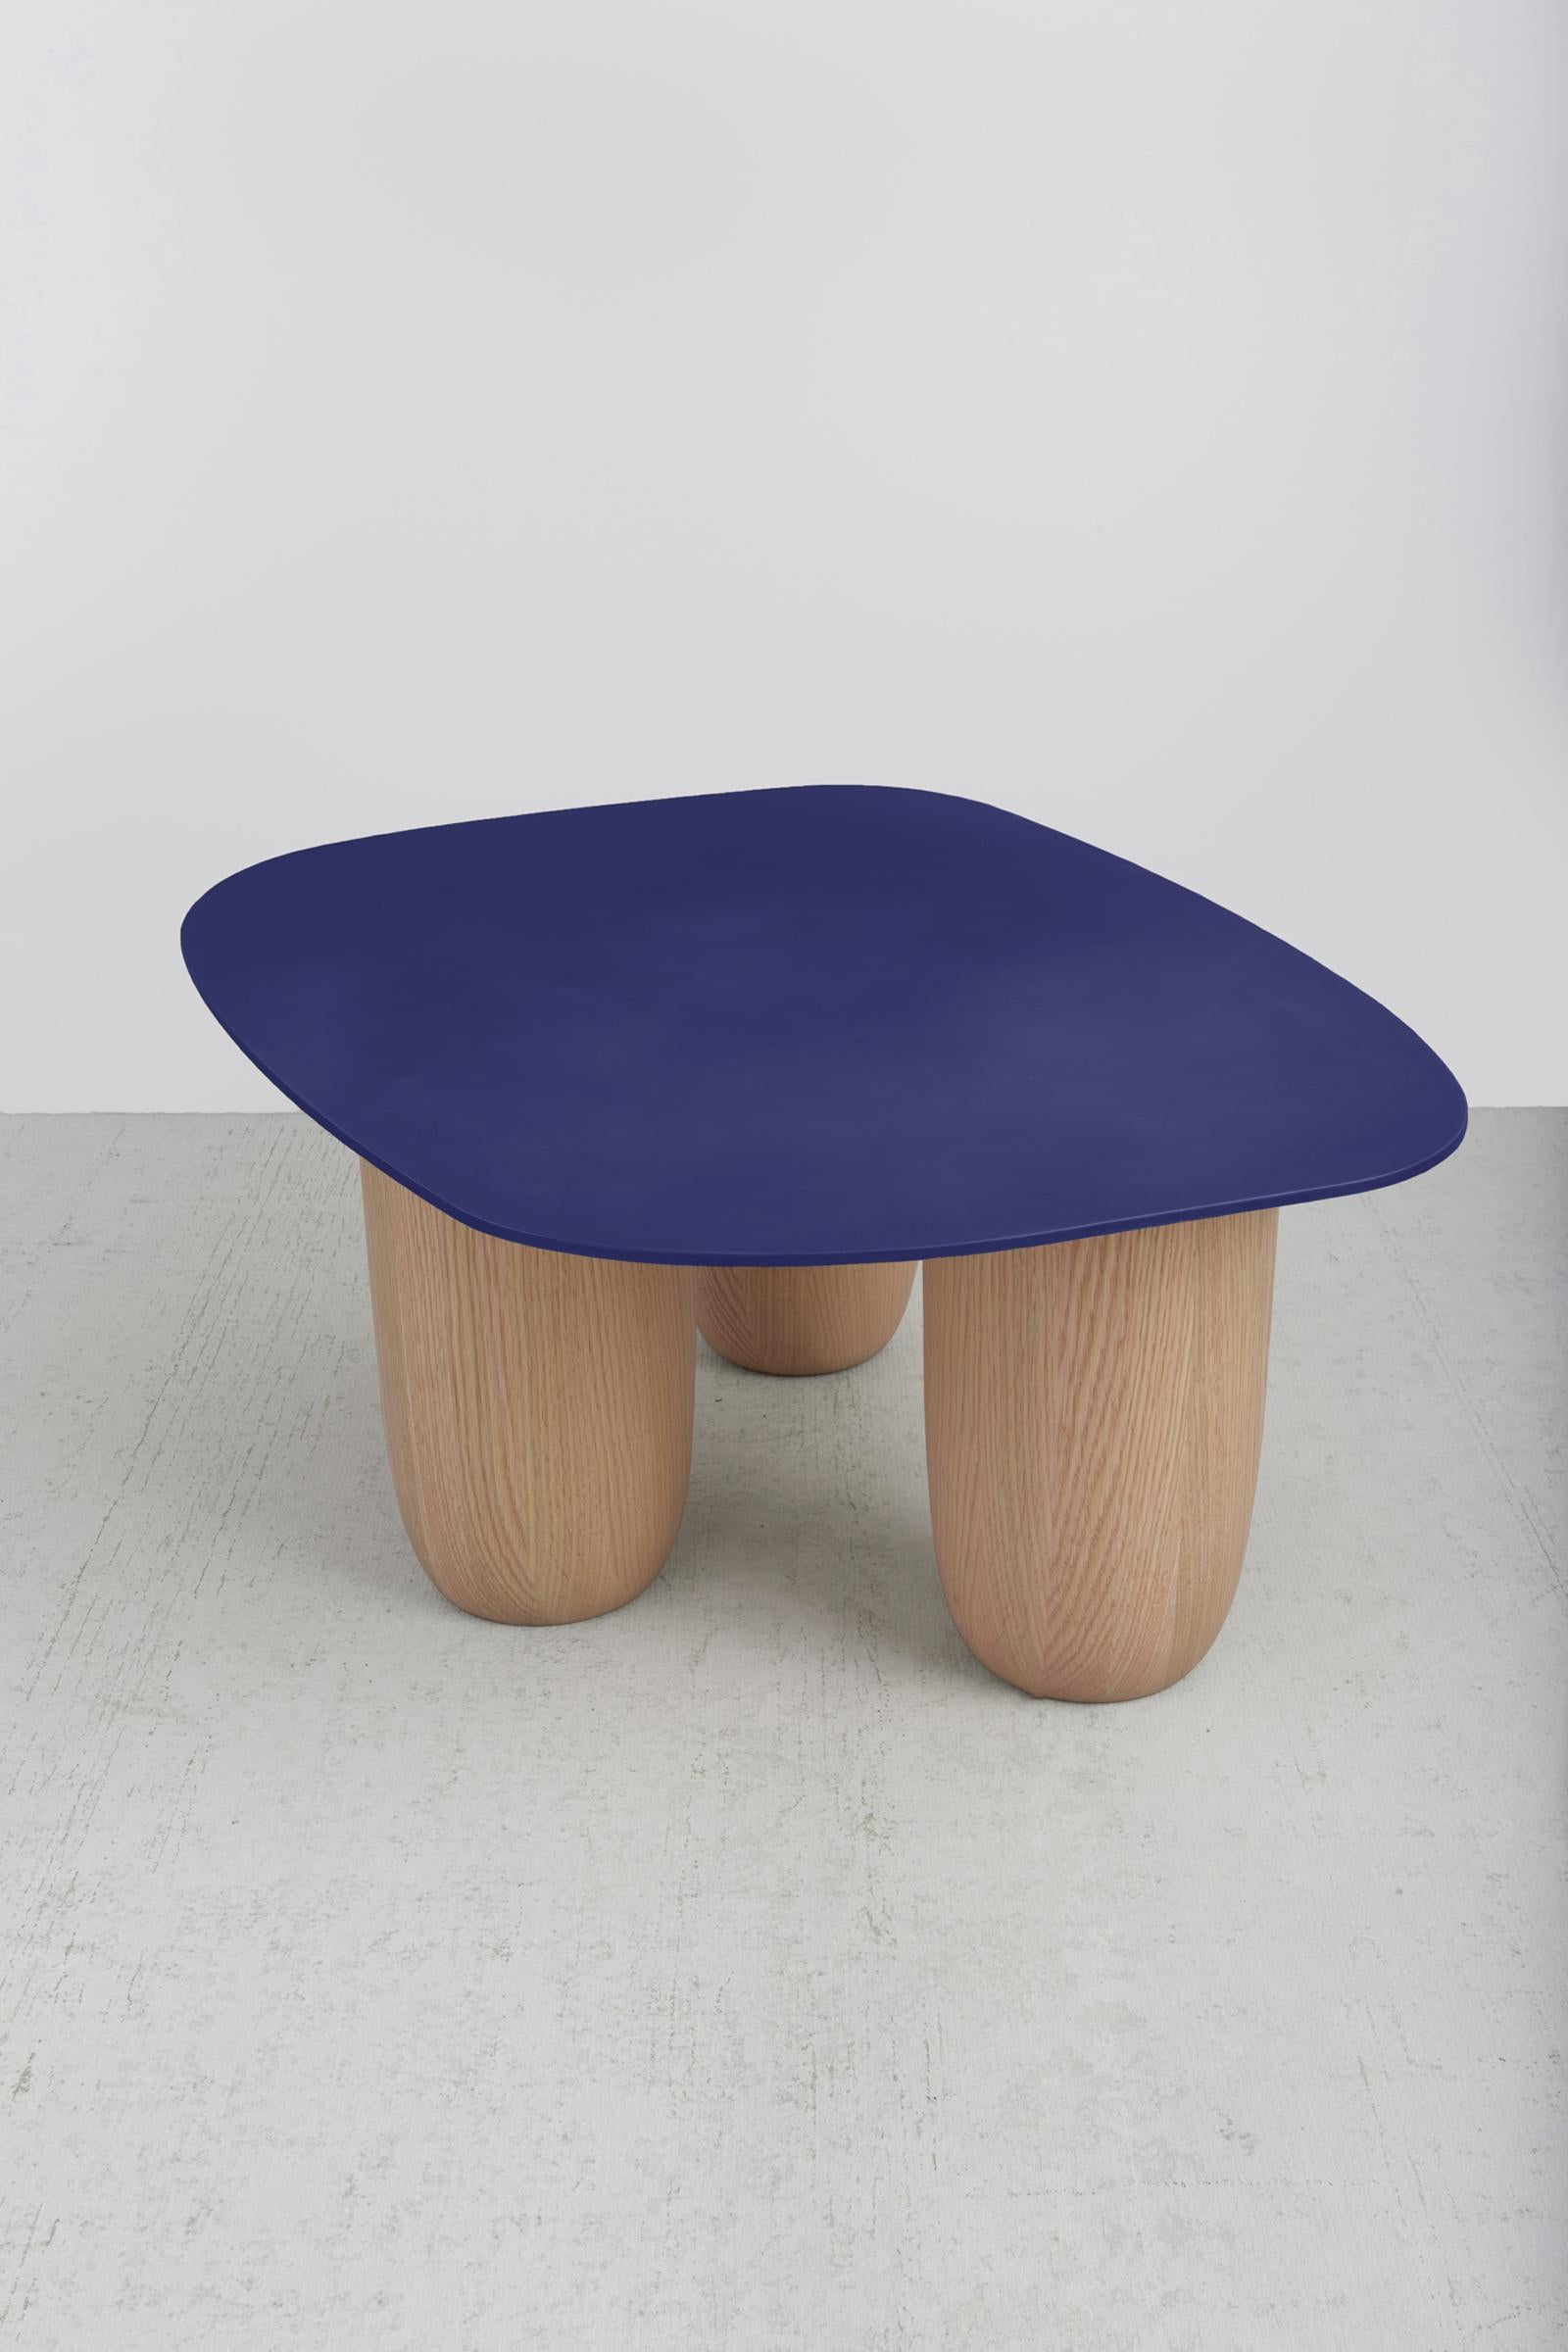 American Contemporary Low Table Blue Steel Top with Natural Oak Legs by Vivian Carbonell